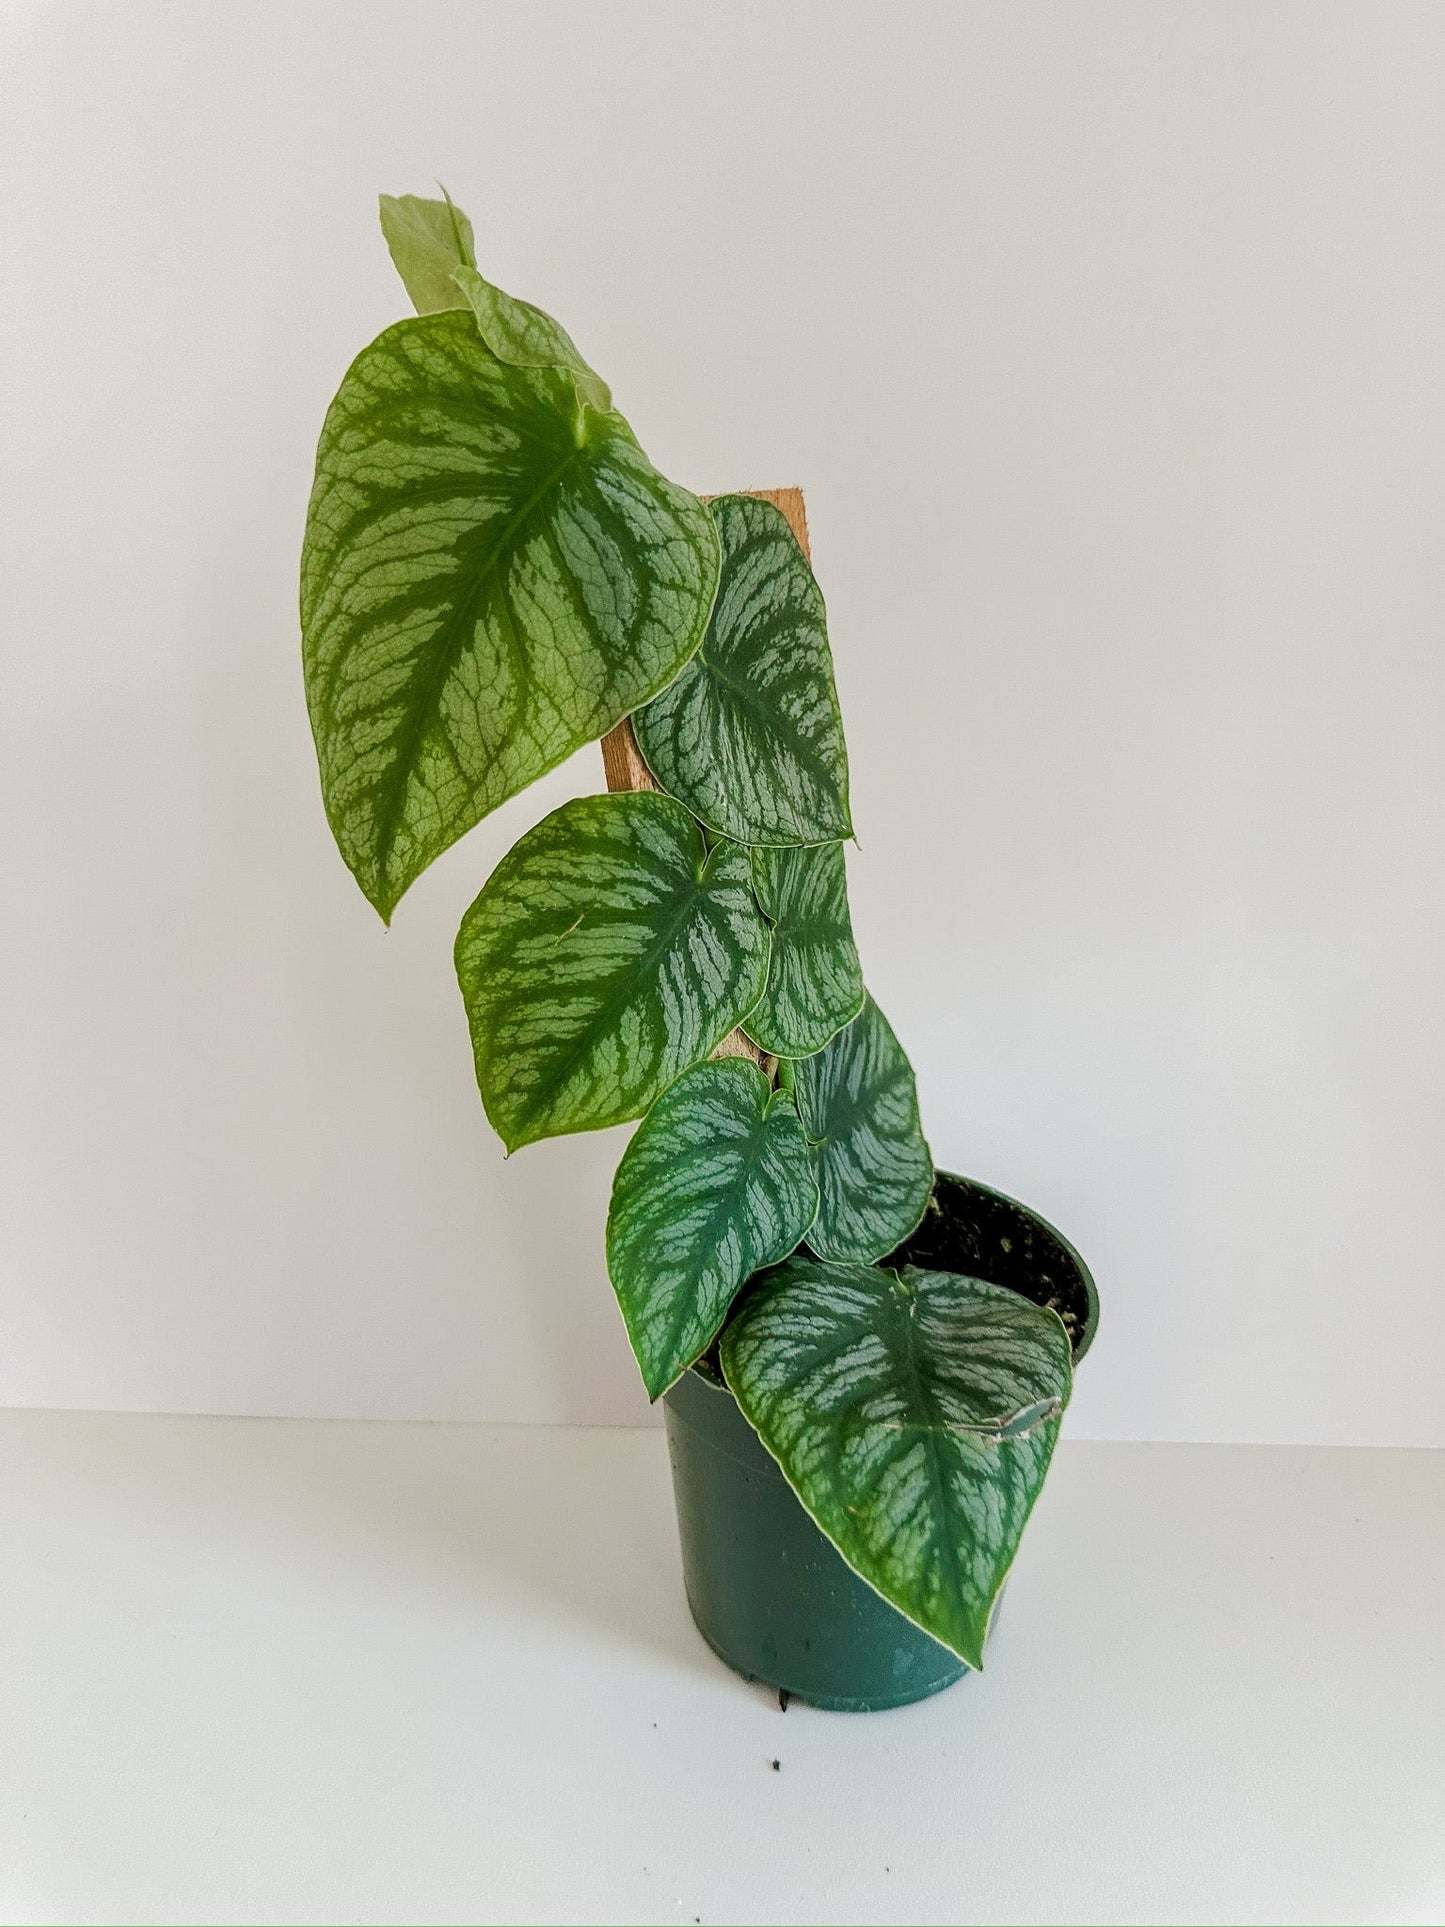 Monstera 'Dubia' (Shingle Plant)- Small Heart Shaped Leaves With Unique Patterned Leaves, Climbing Monstera- Tropical Houseplant- (4 Inch Nursery Pot)